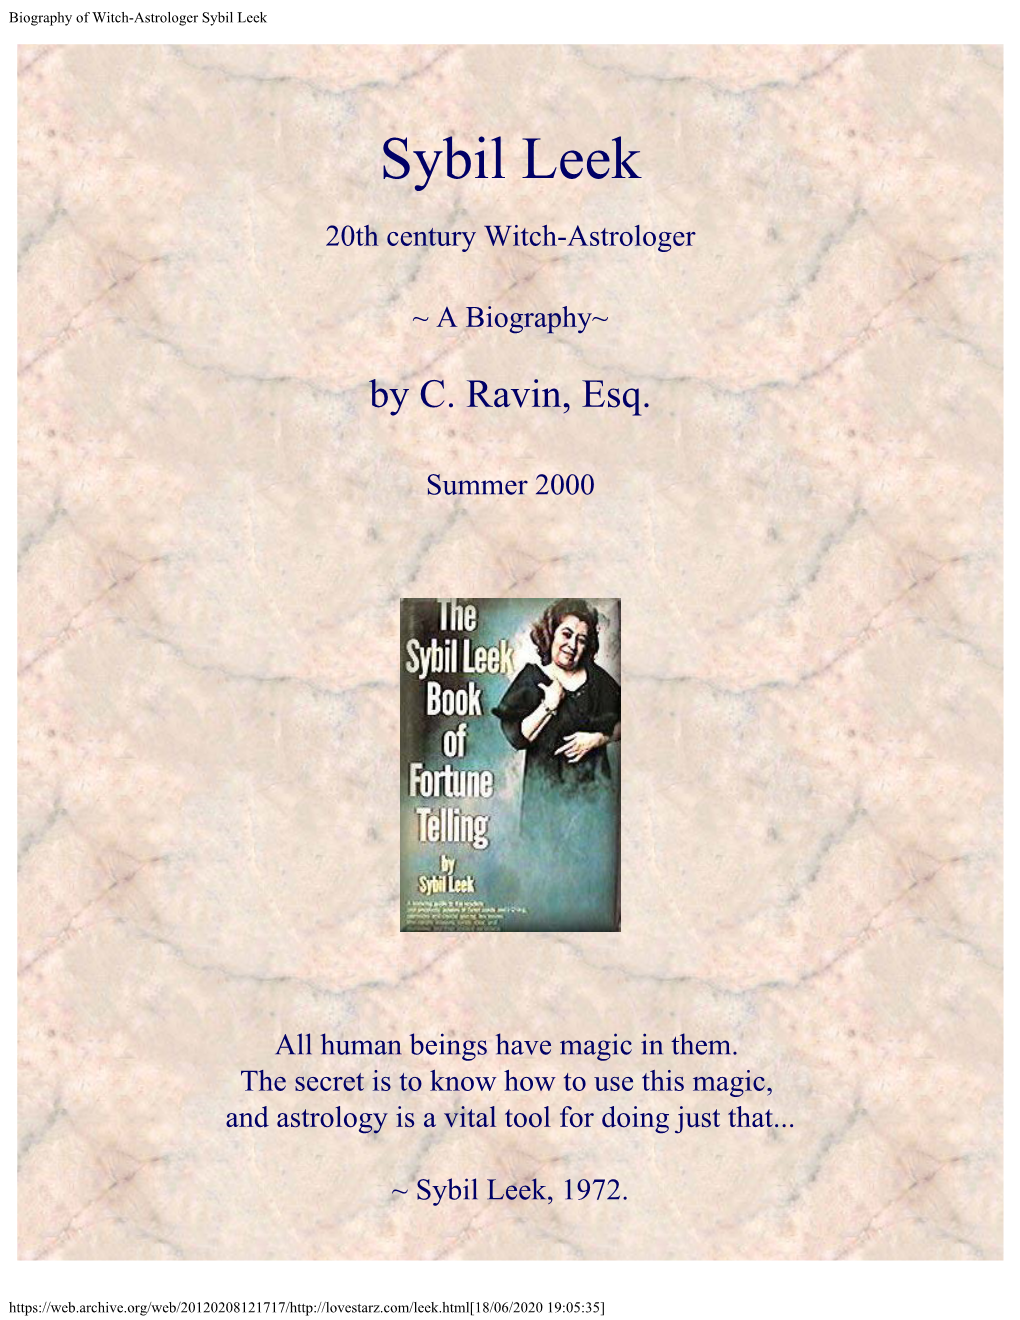 Biography of Witch-Astrologer Sybil Leek